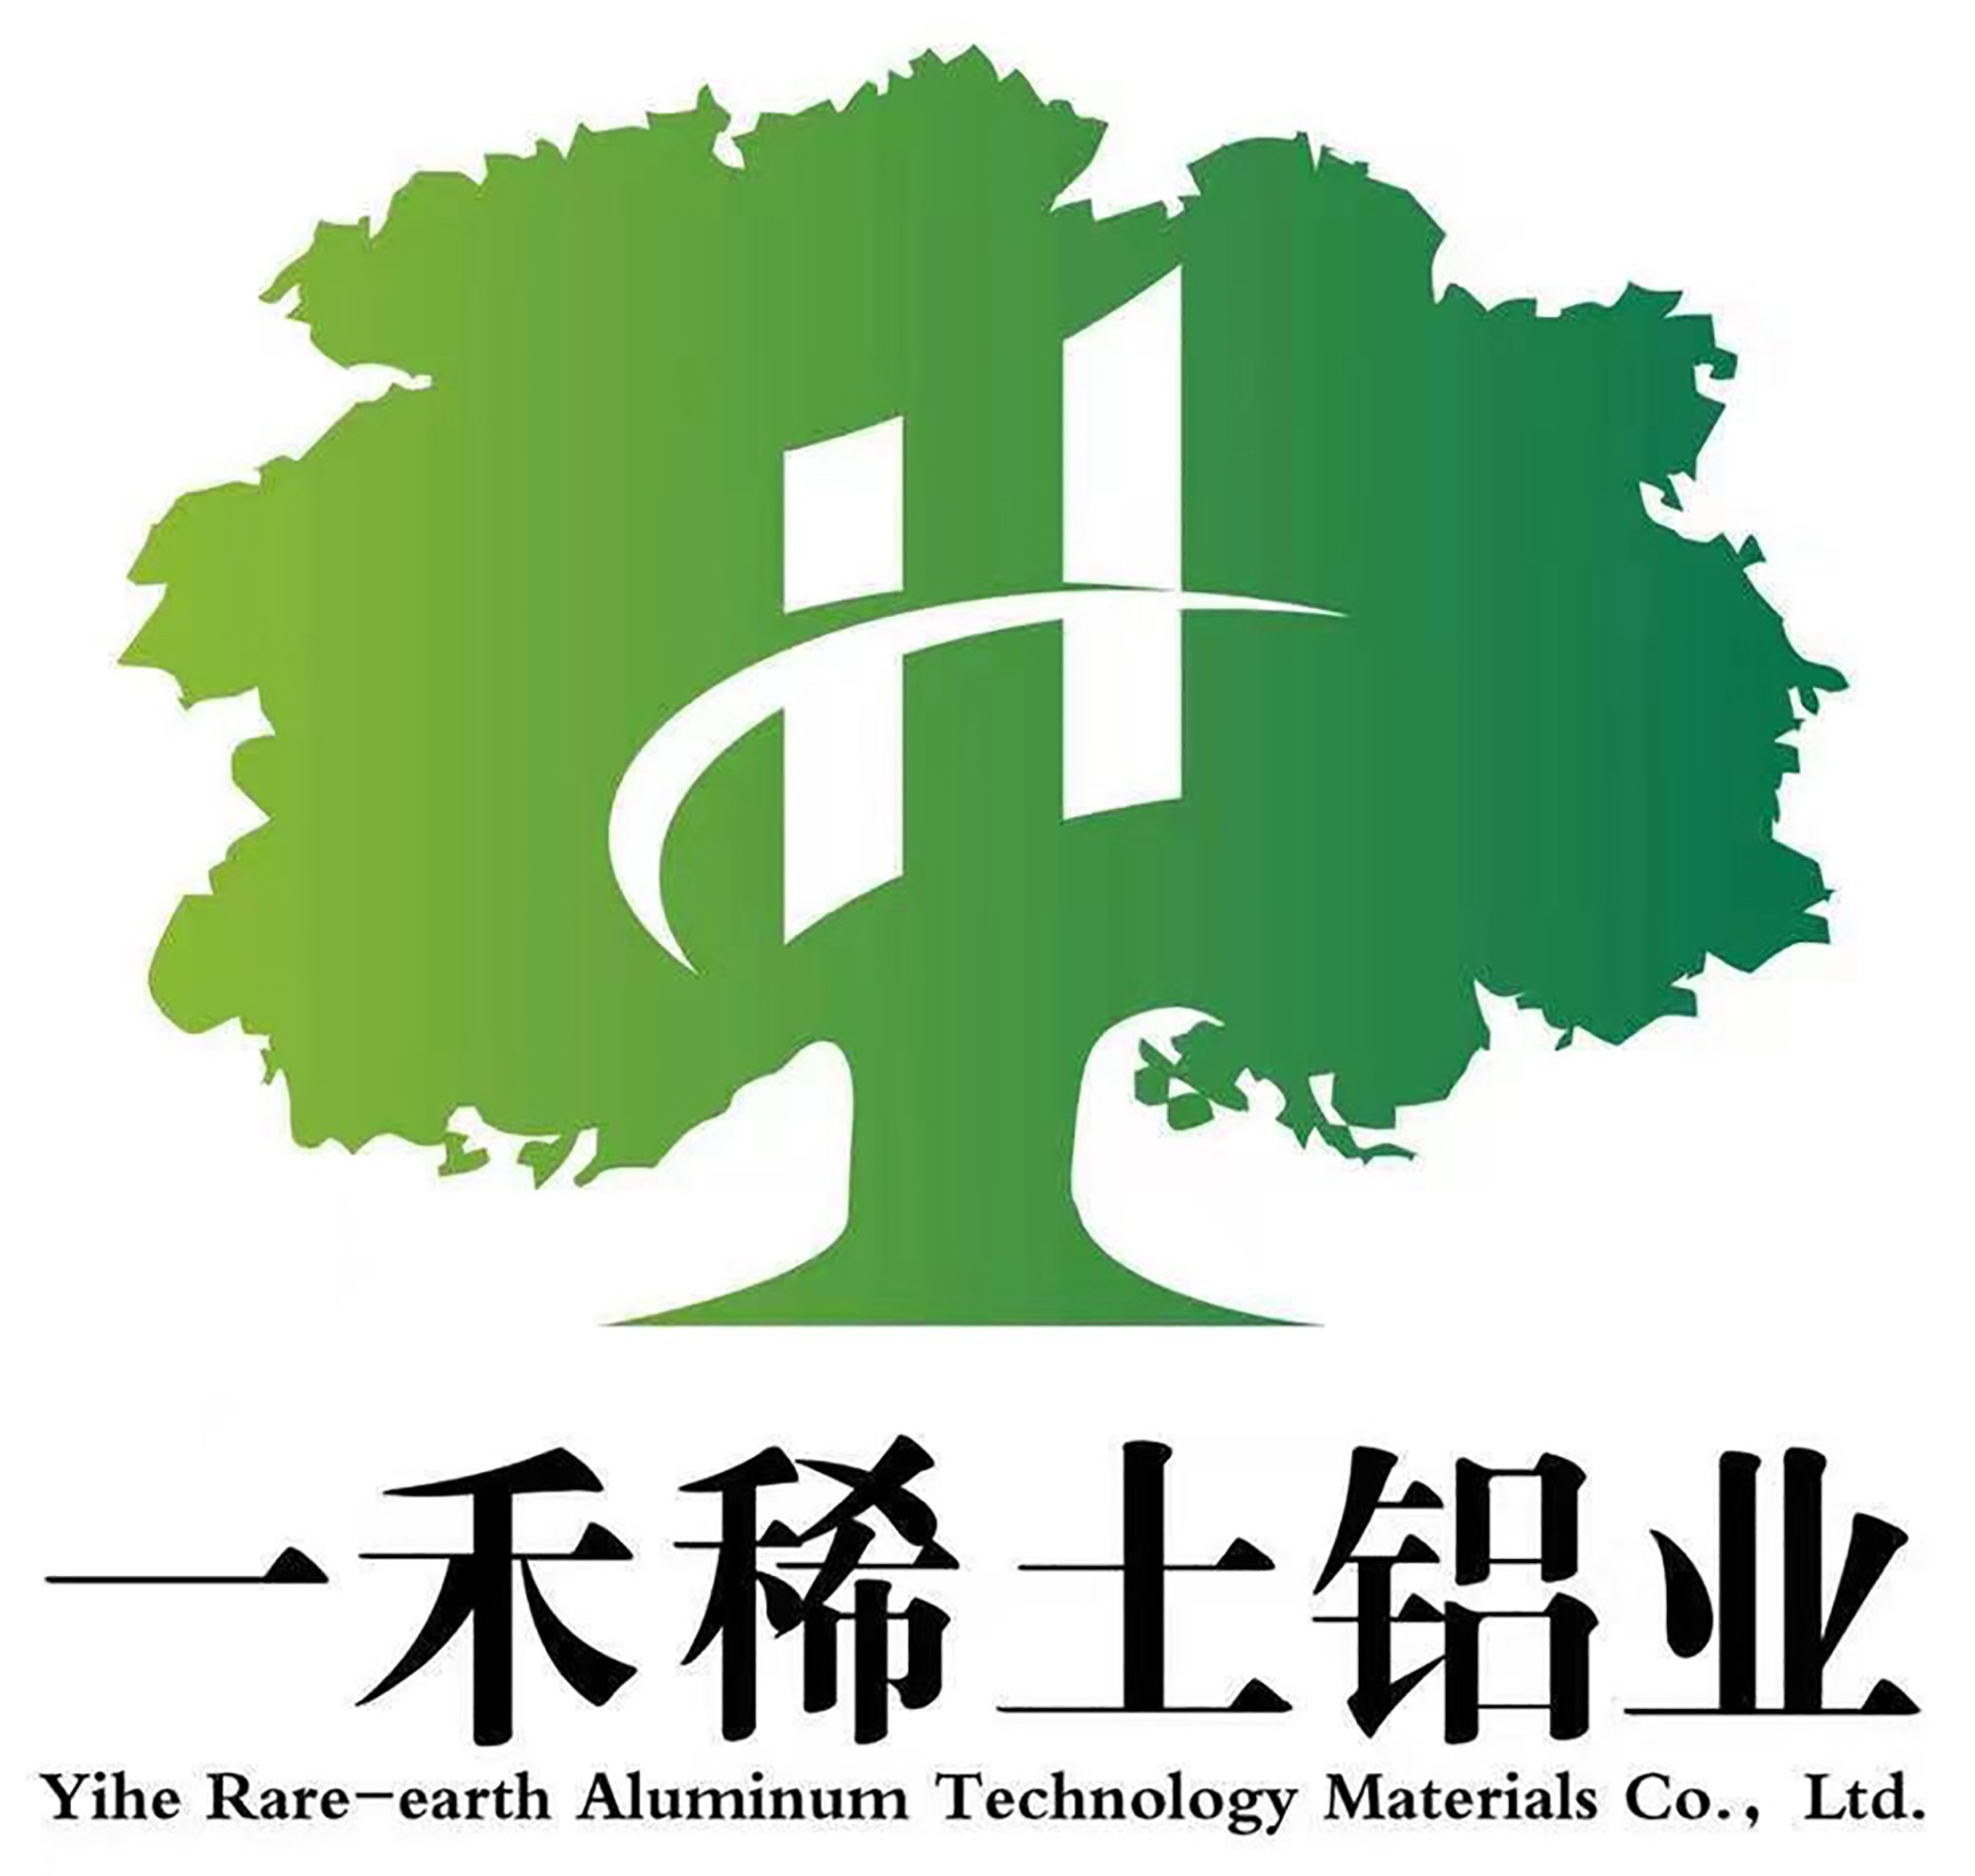 Cooperation with Zhejiang lurens Electric Co., Ltd